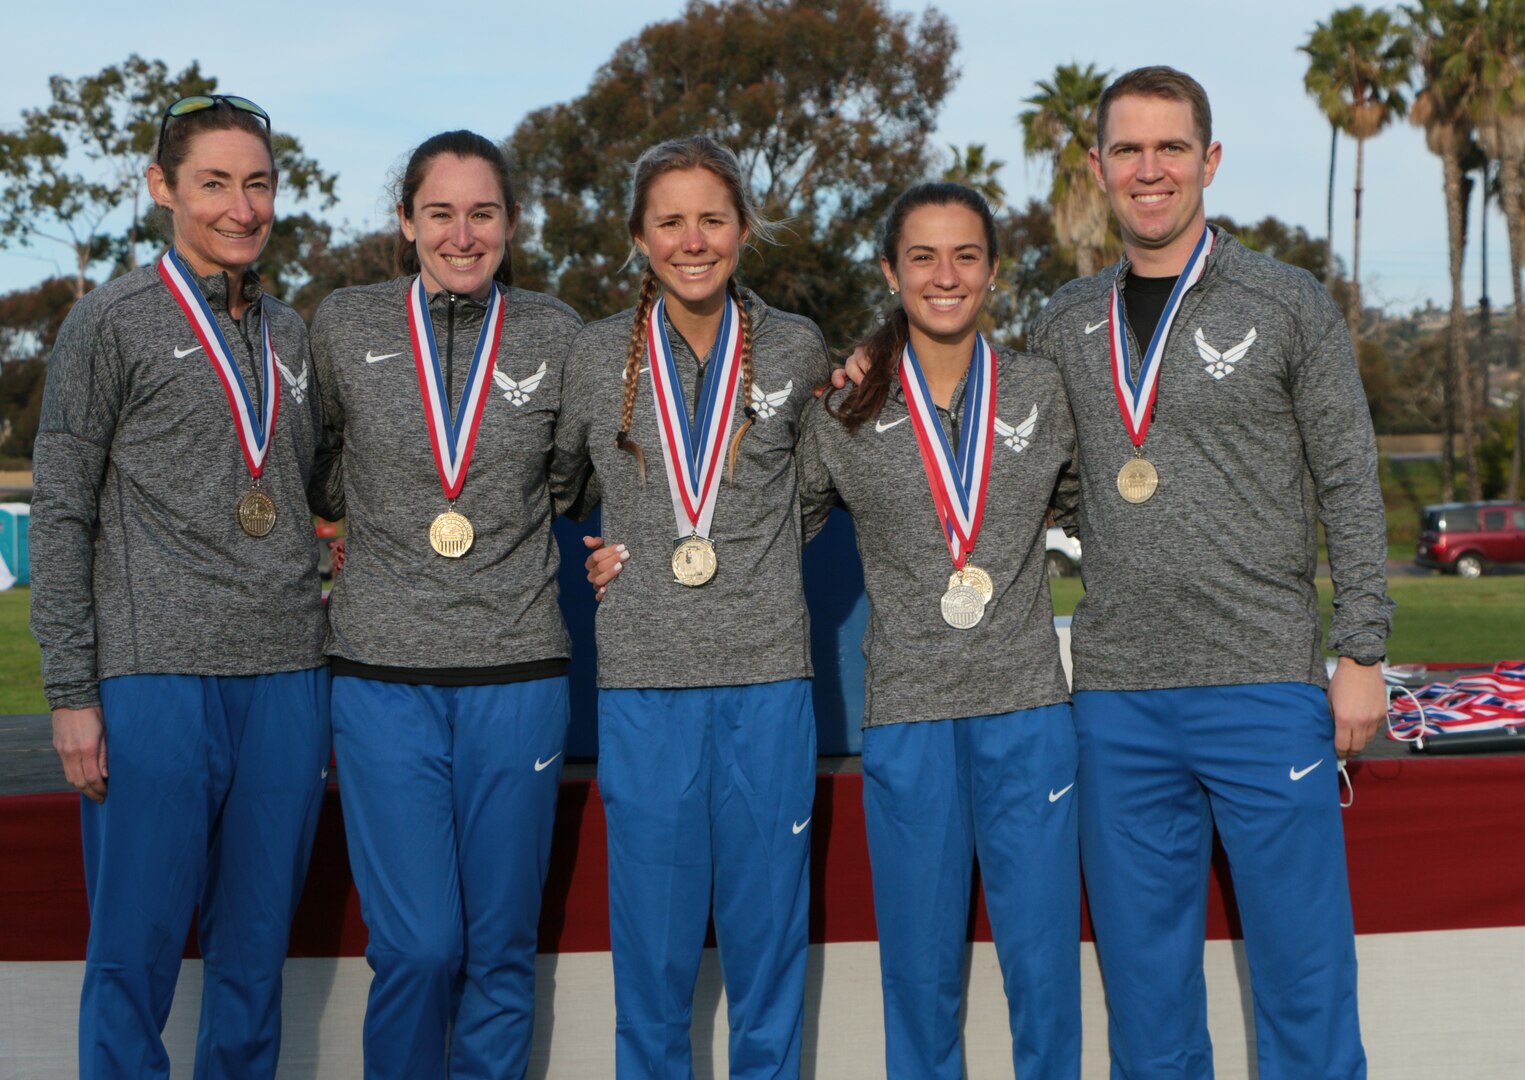 Air Force women win team gold during the 2022 Armed Forces Cross Country Championship held in conjunction with the USA Track and Field National Cross Country Championship at Mission Bay Park in San Diego, Calif. on January 8th.  Runners from the Marine Corps, Navy (with Coast Guard) and Air Force compete for gold.  (Department of Defense Photo - Released)